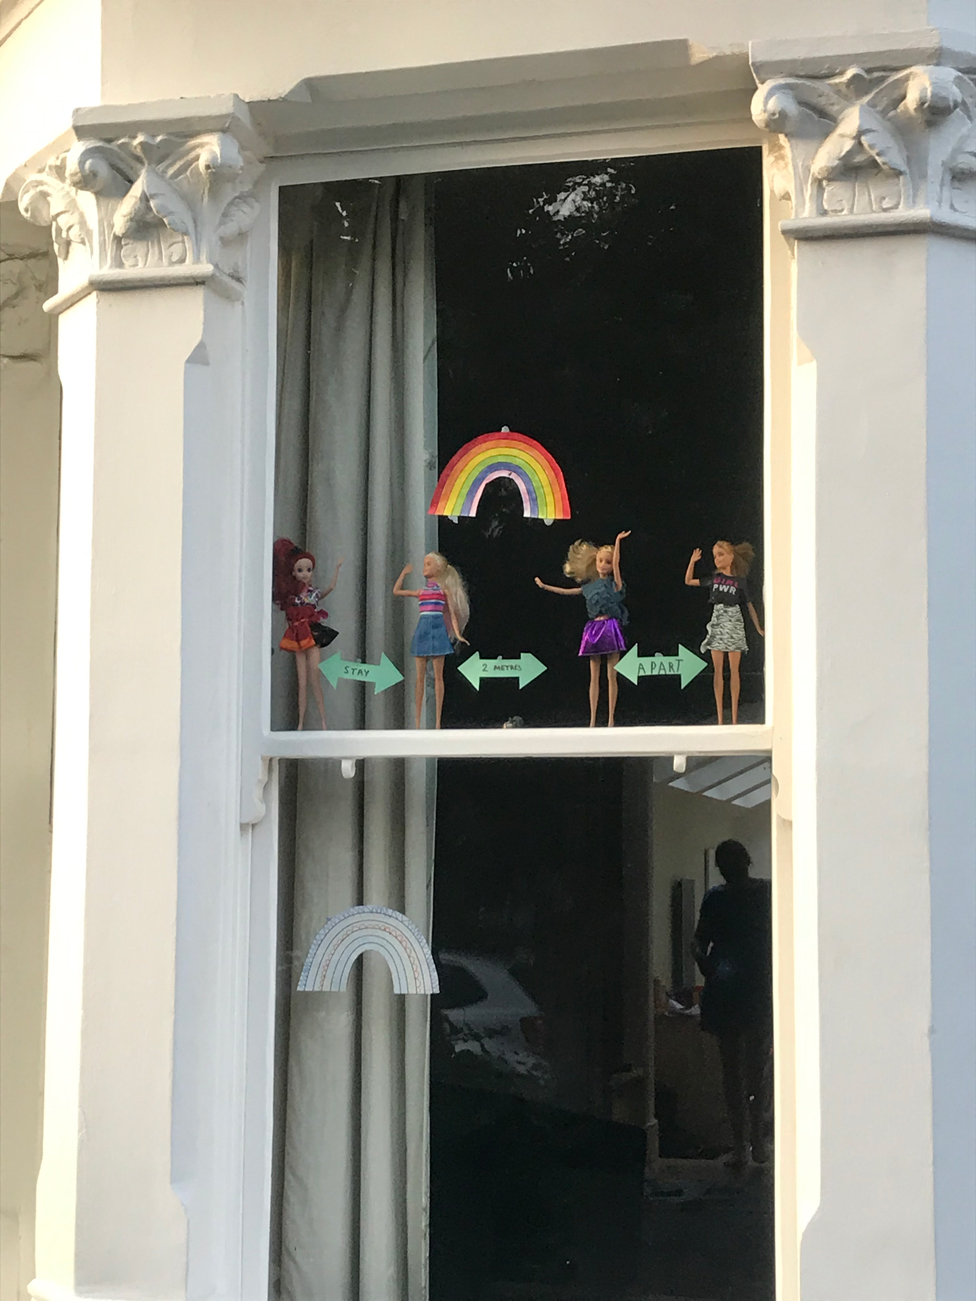 A row of Barbie dolls seen at a window.